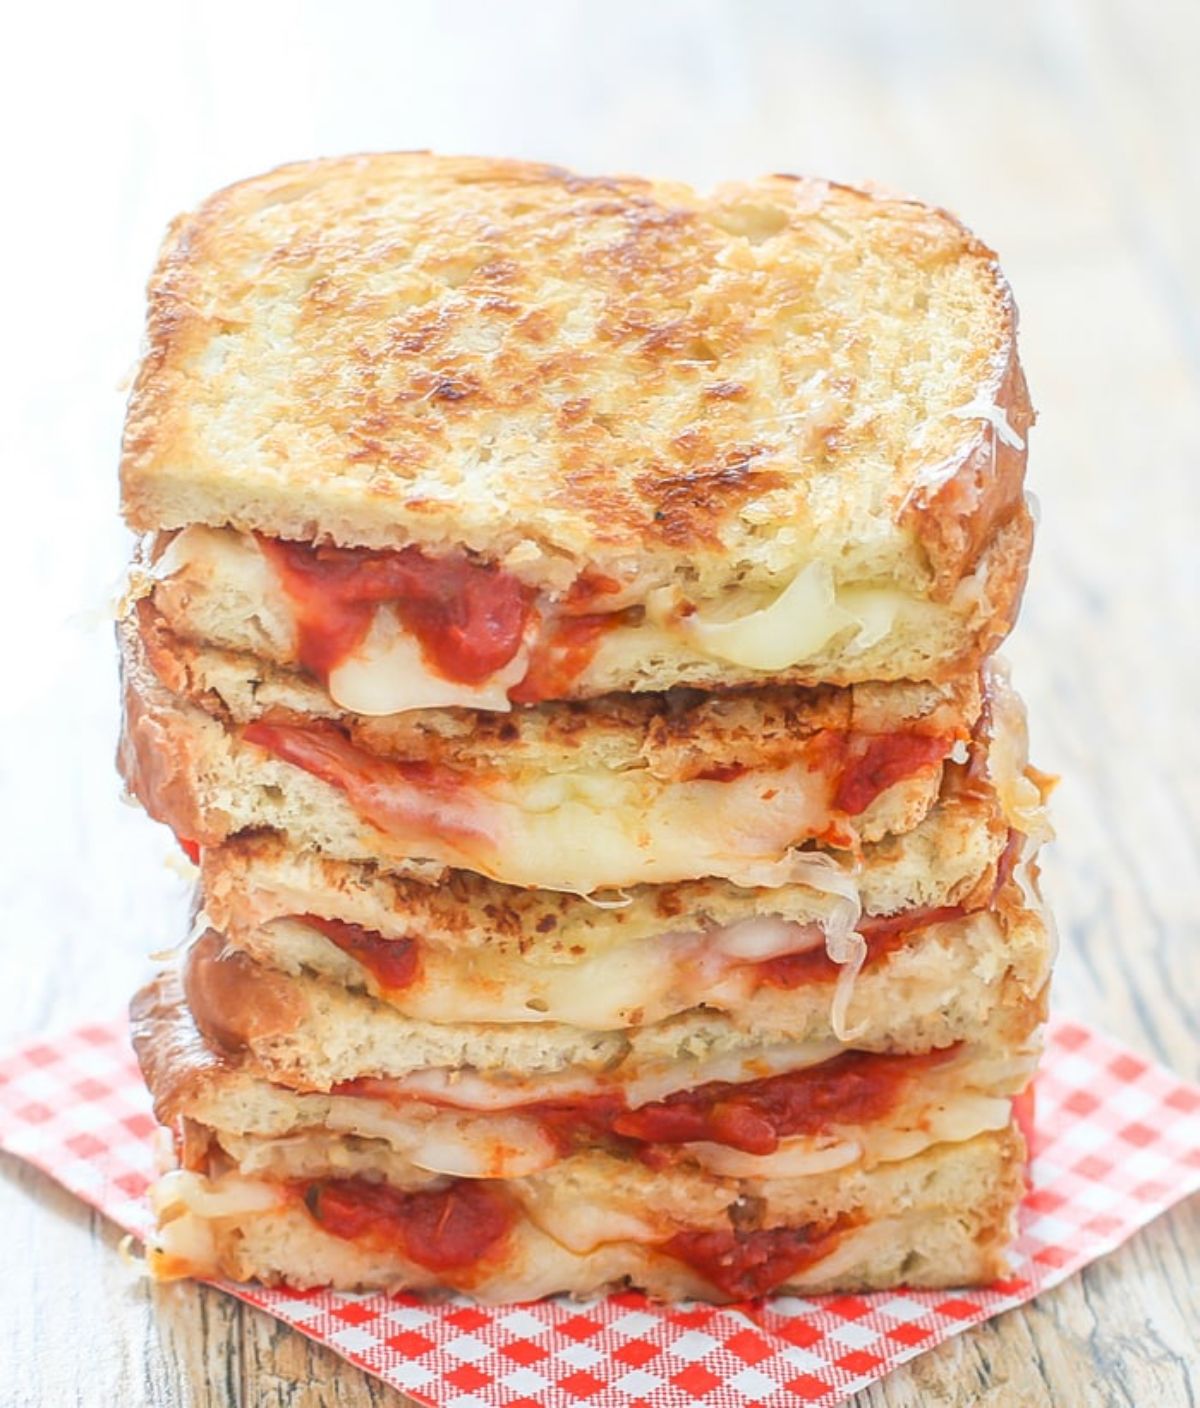 A pile of pizza grilled cheese sandwiches